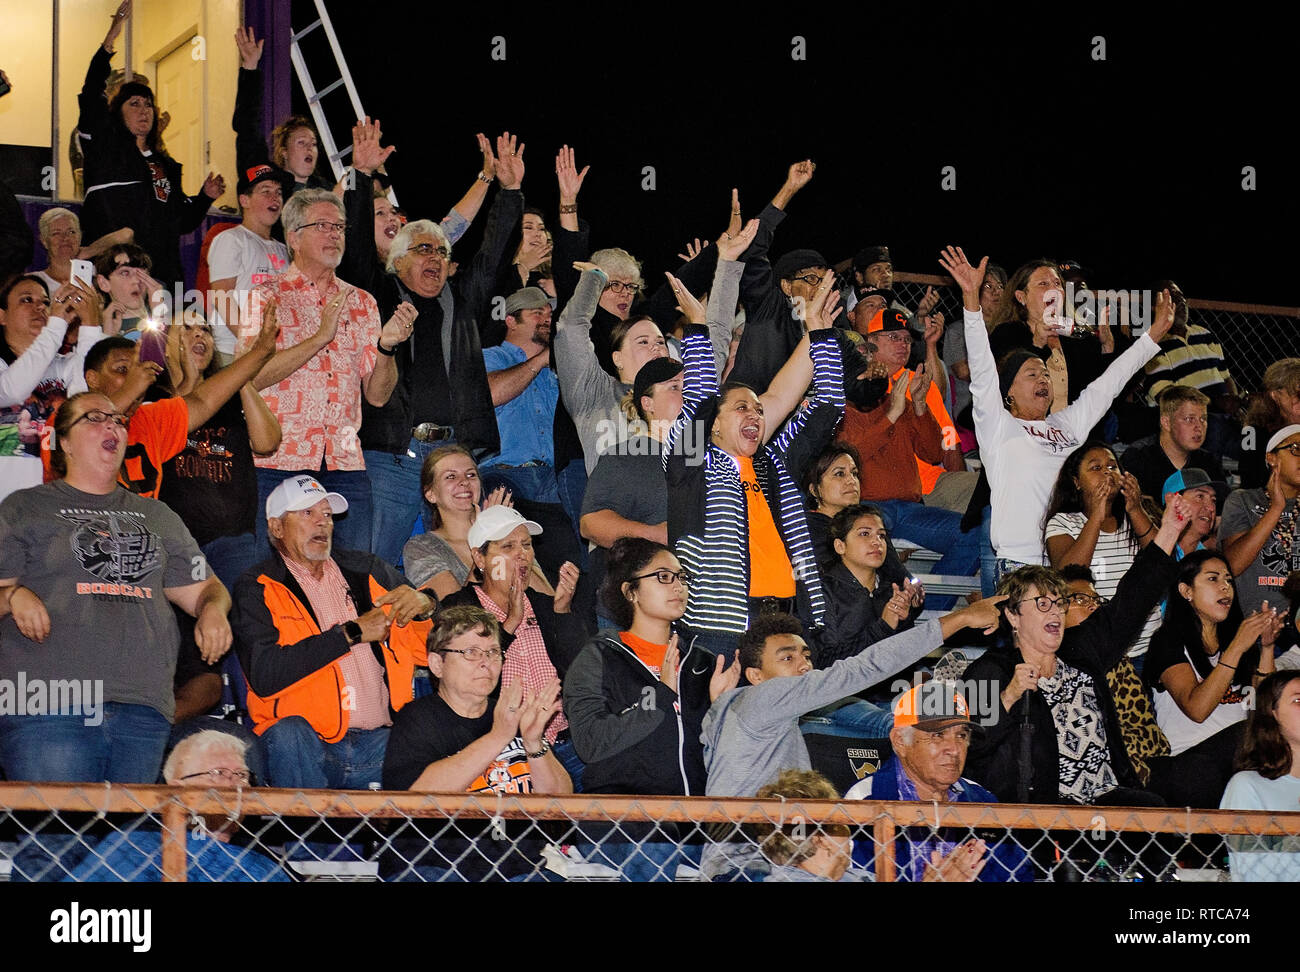 Refugio High School football fans leap to their seats as the team scores, Sept. 29, 2017, in Seguin, Texas. They lost to Navarro High School 21-17. Stock Photo